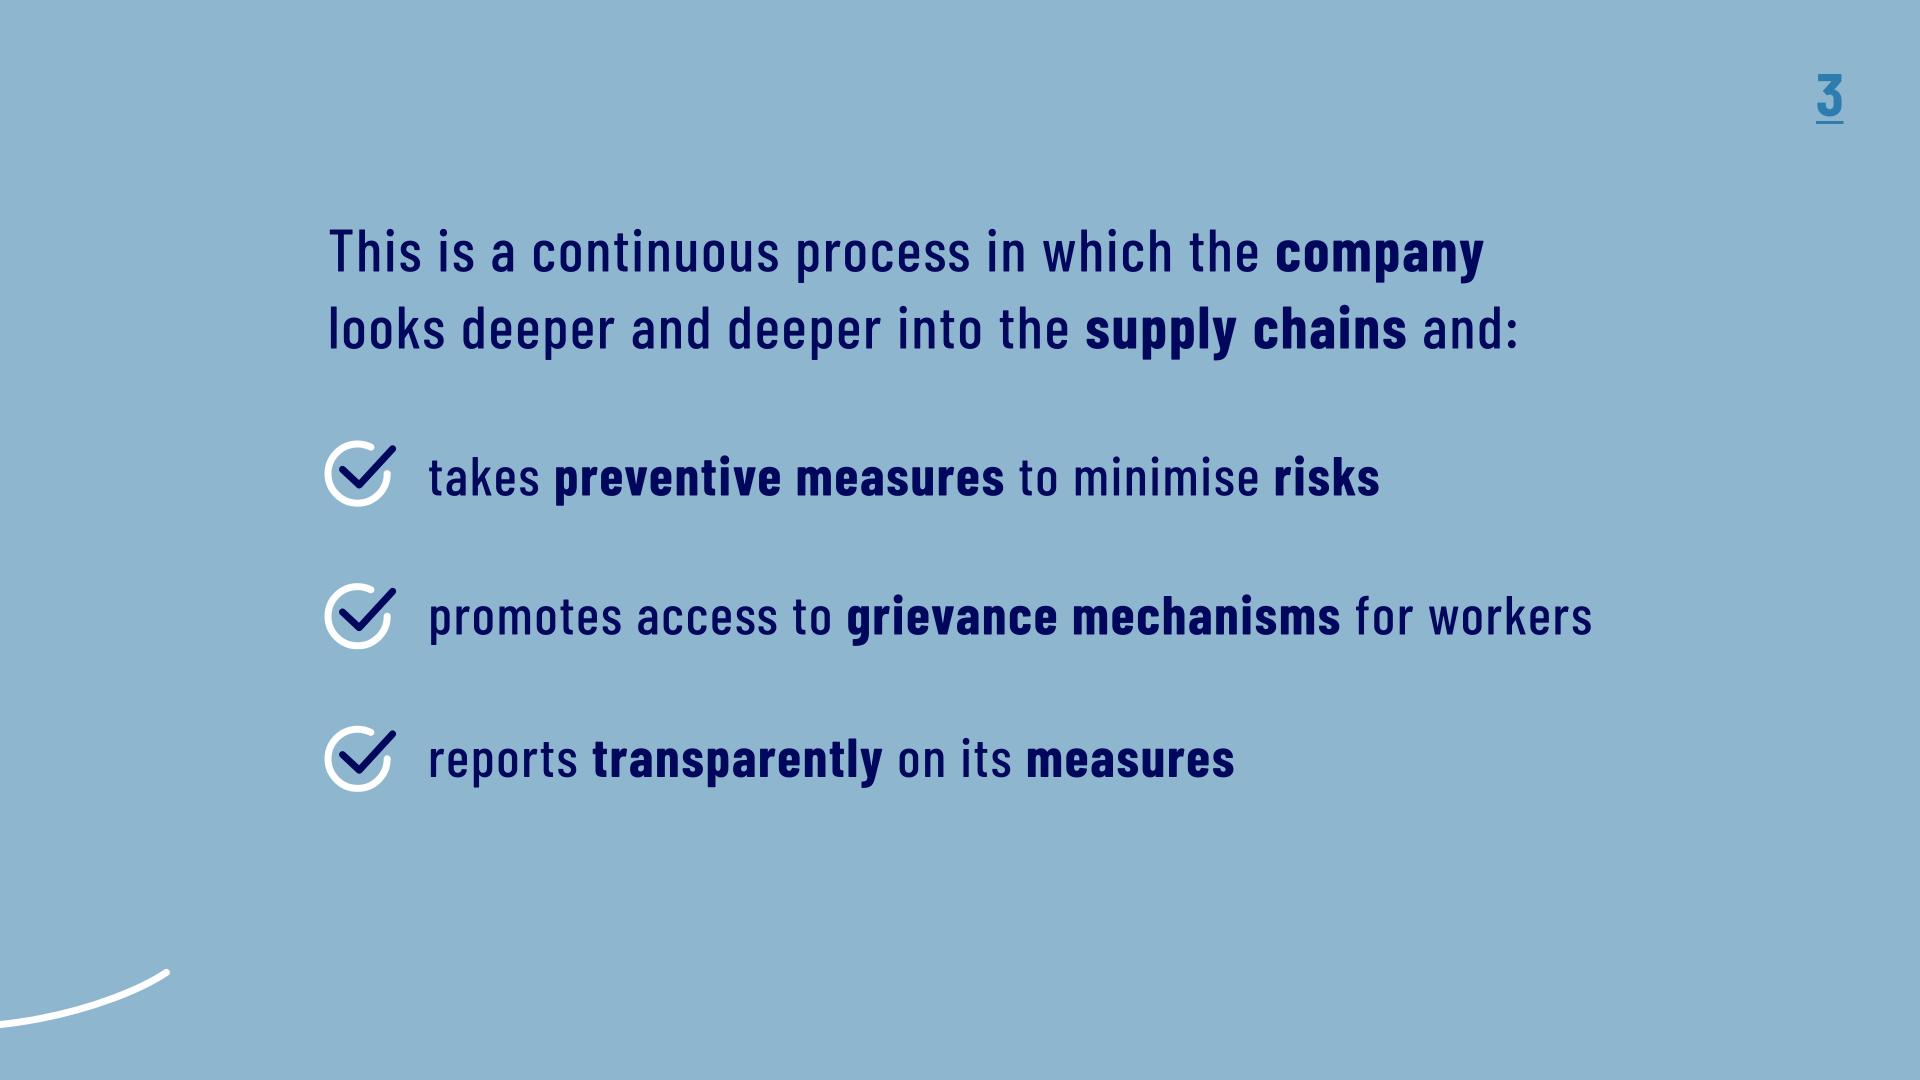 This is a continuous process in which the company looks deeper and deeperinto the supply chains and takes rpeventive measures to minimise risks, promotes access to grievance mechanisms for workers, reports transparently on its measures. 